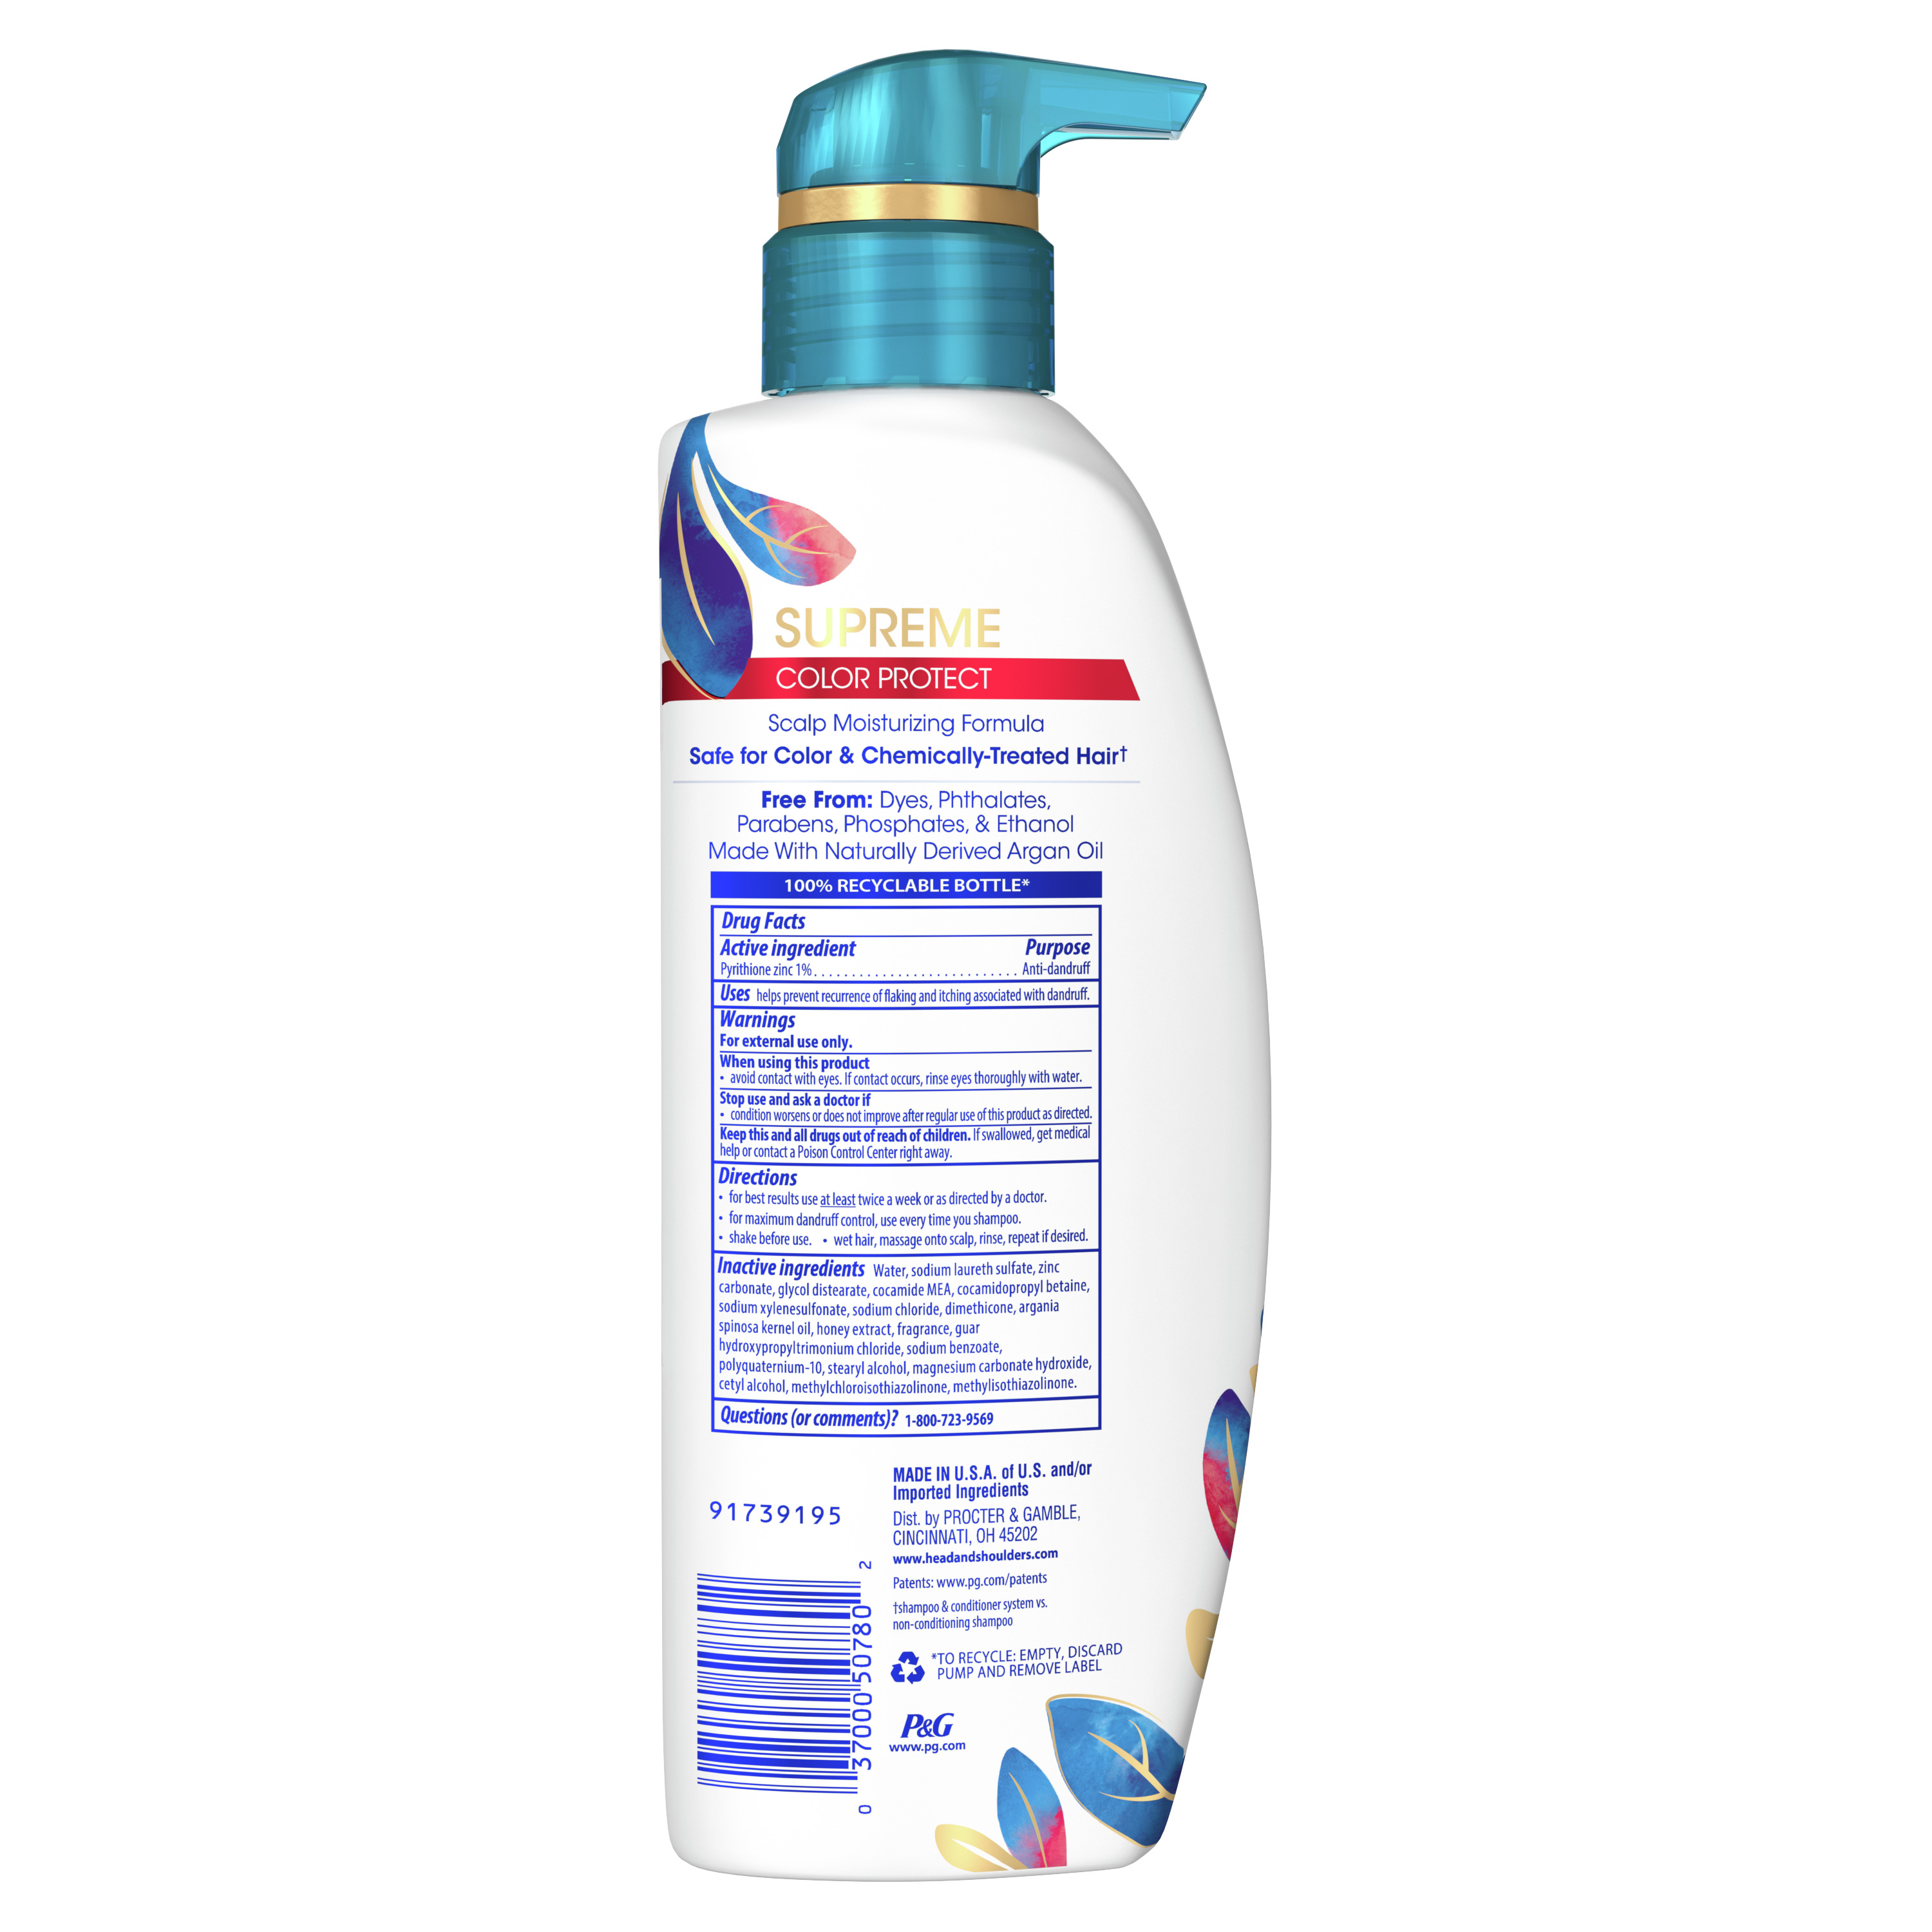 Head & Shoulders Supreme Moisturizing Color Protect Dandruff Relief Daily Shampoo with Honey, 11.8 fl oz - image 3 of 14